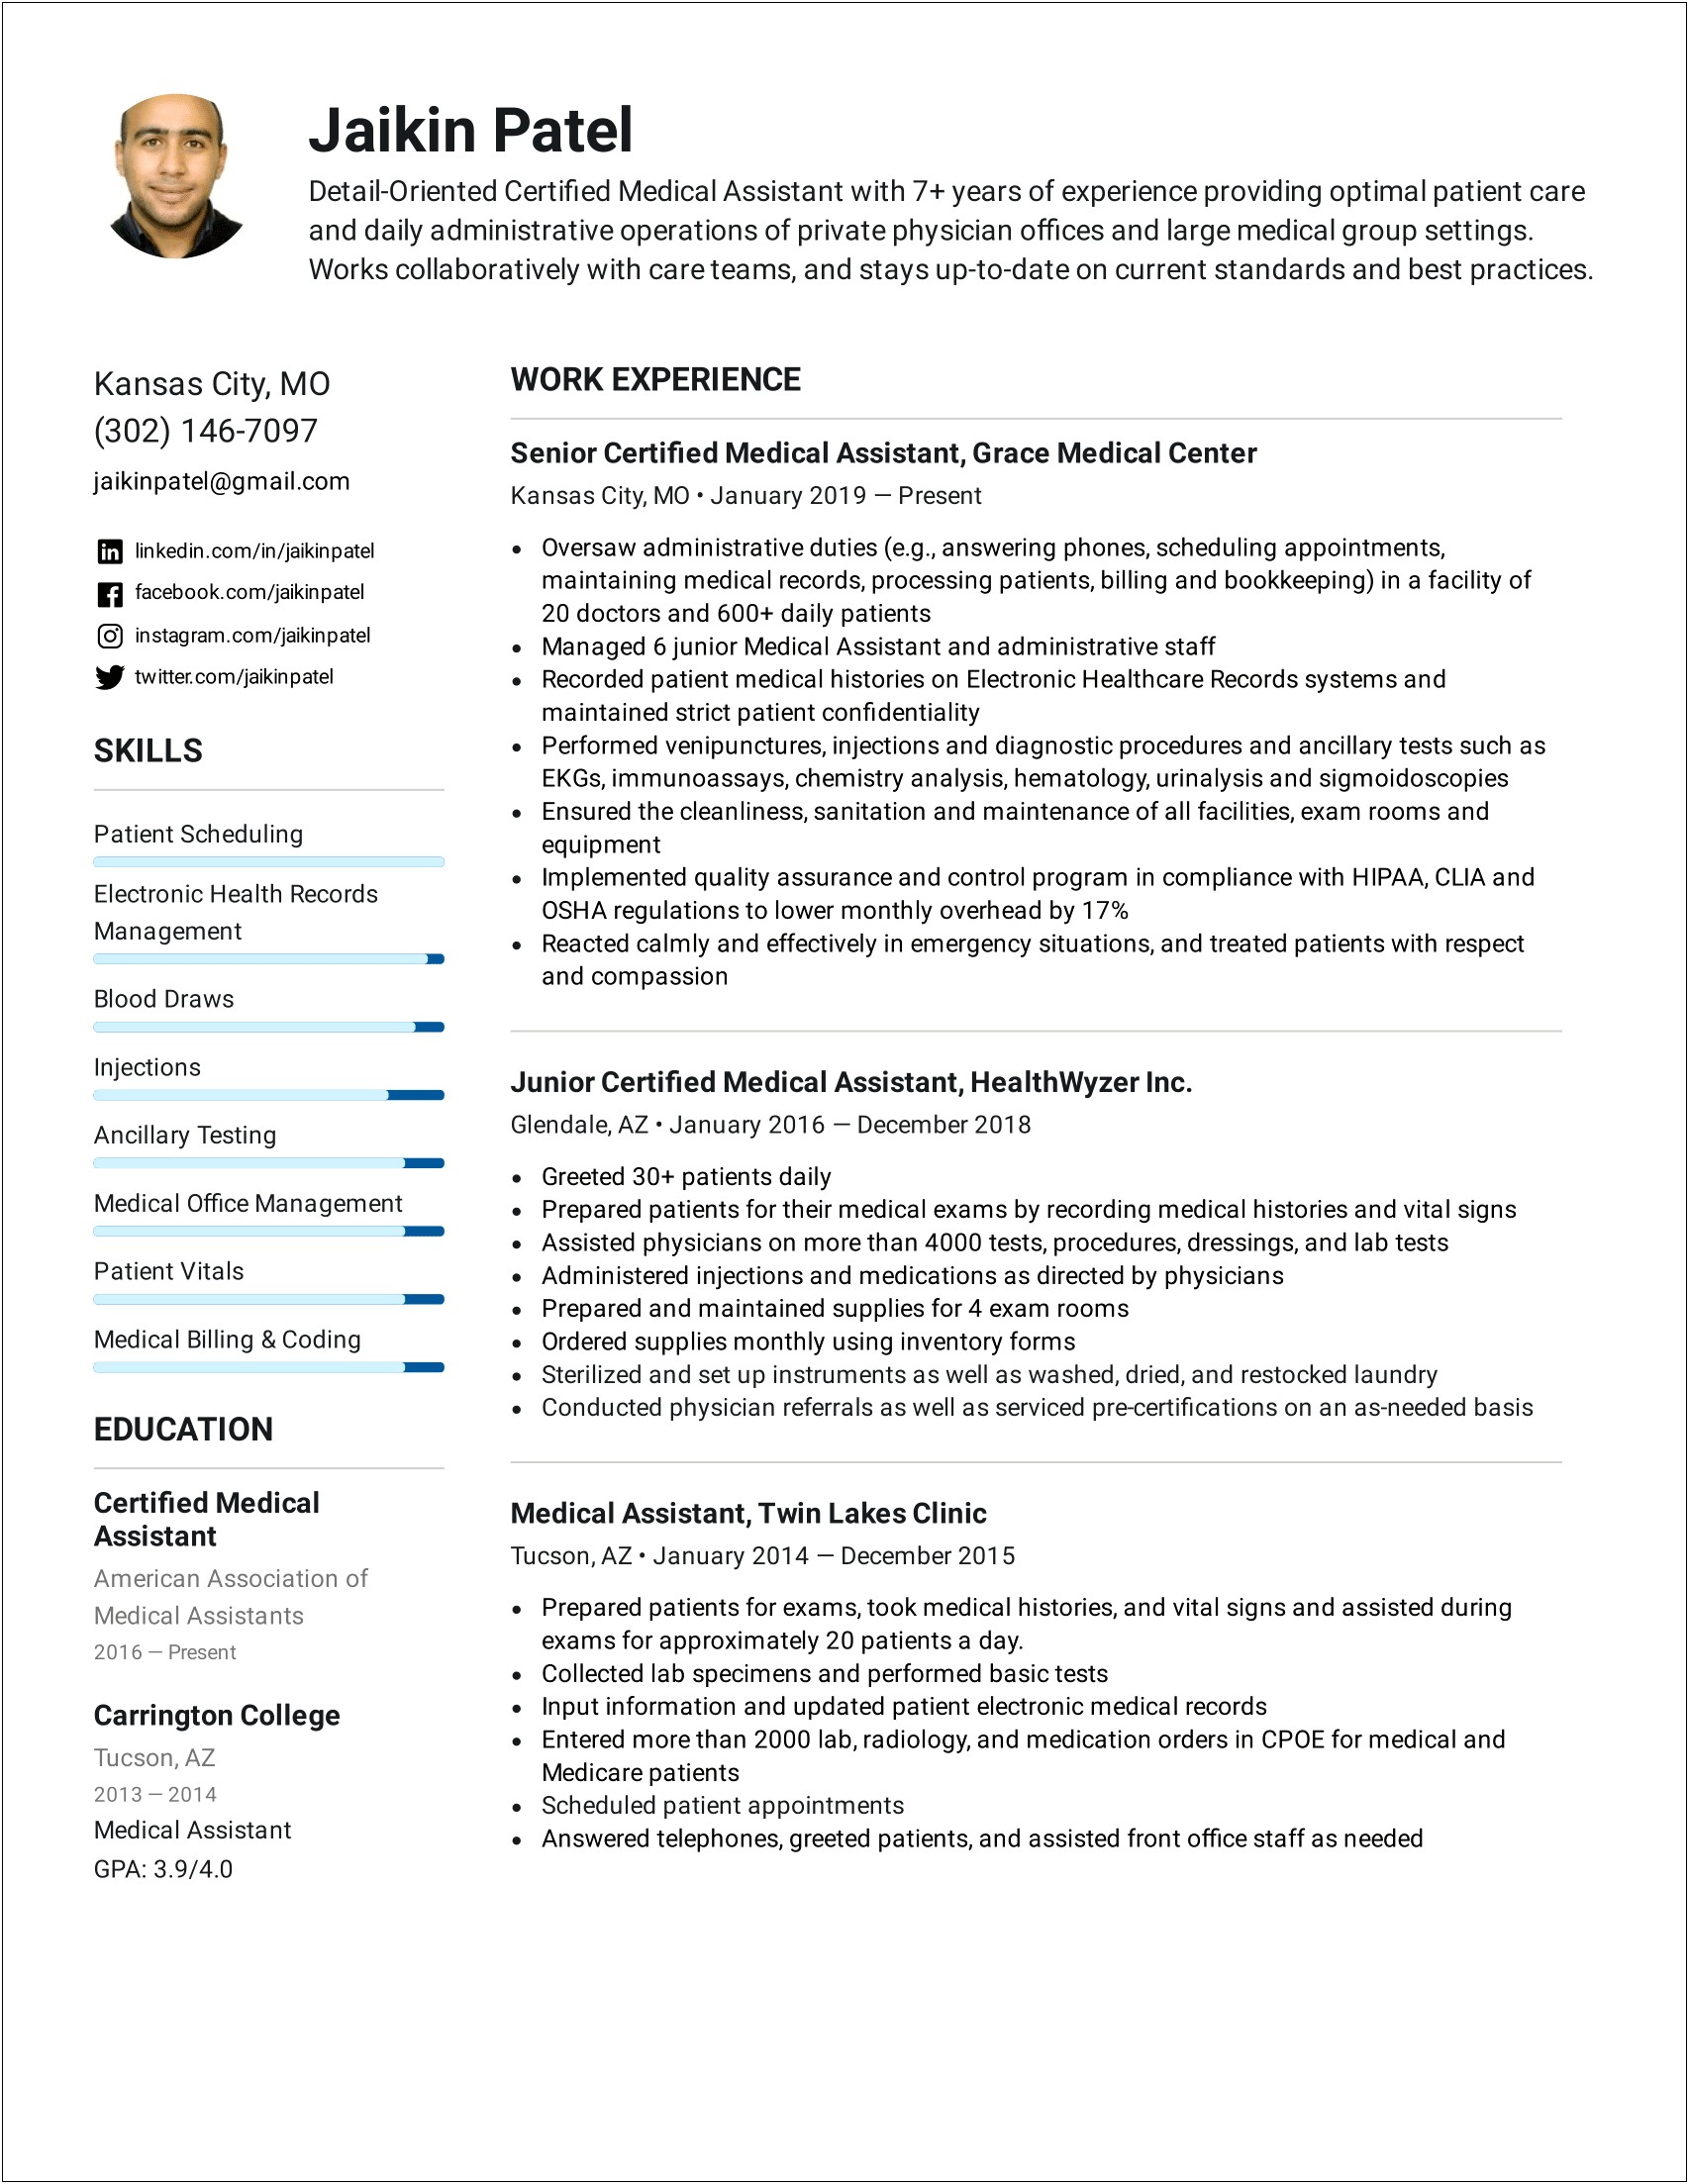 Resume With Job Title Before Company